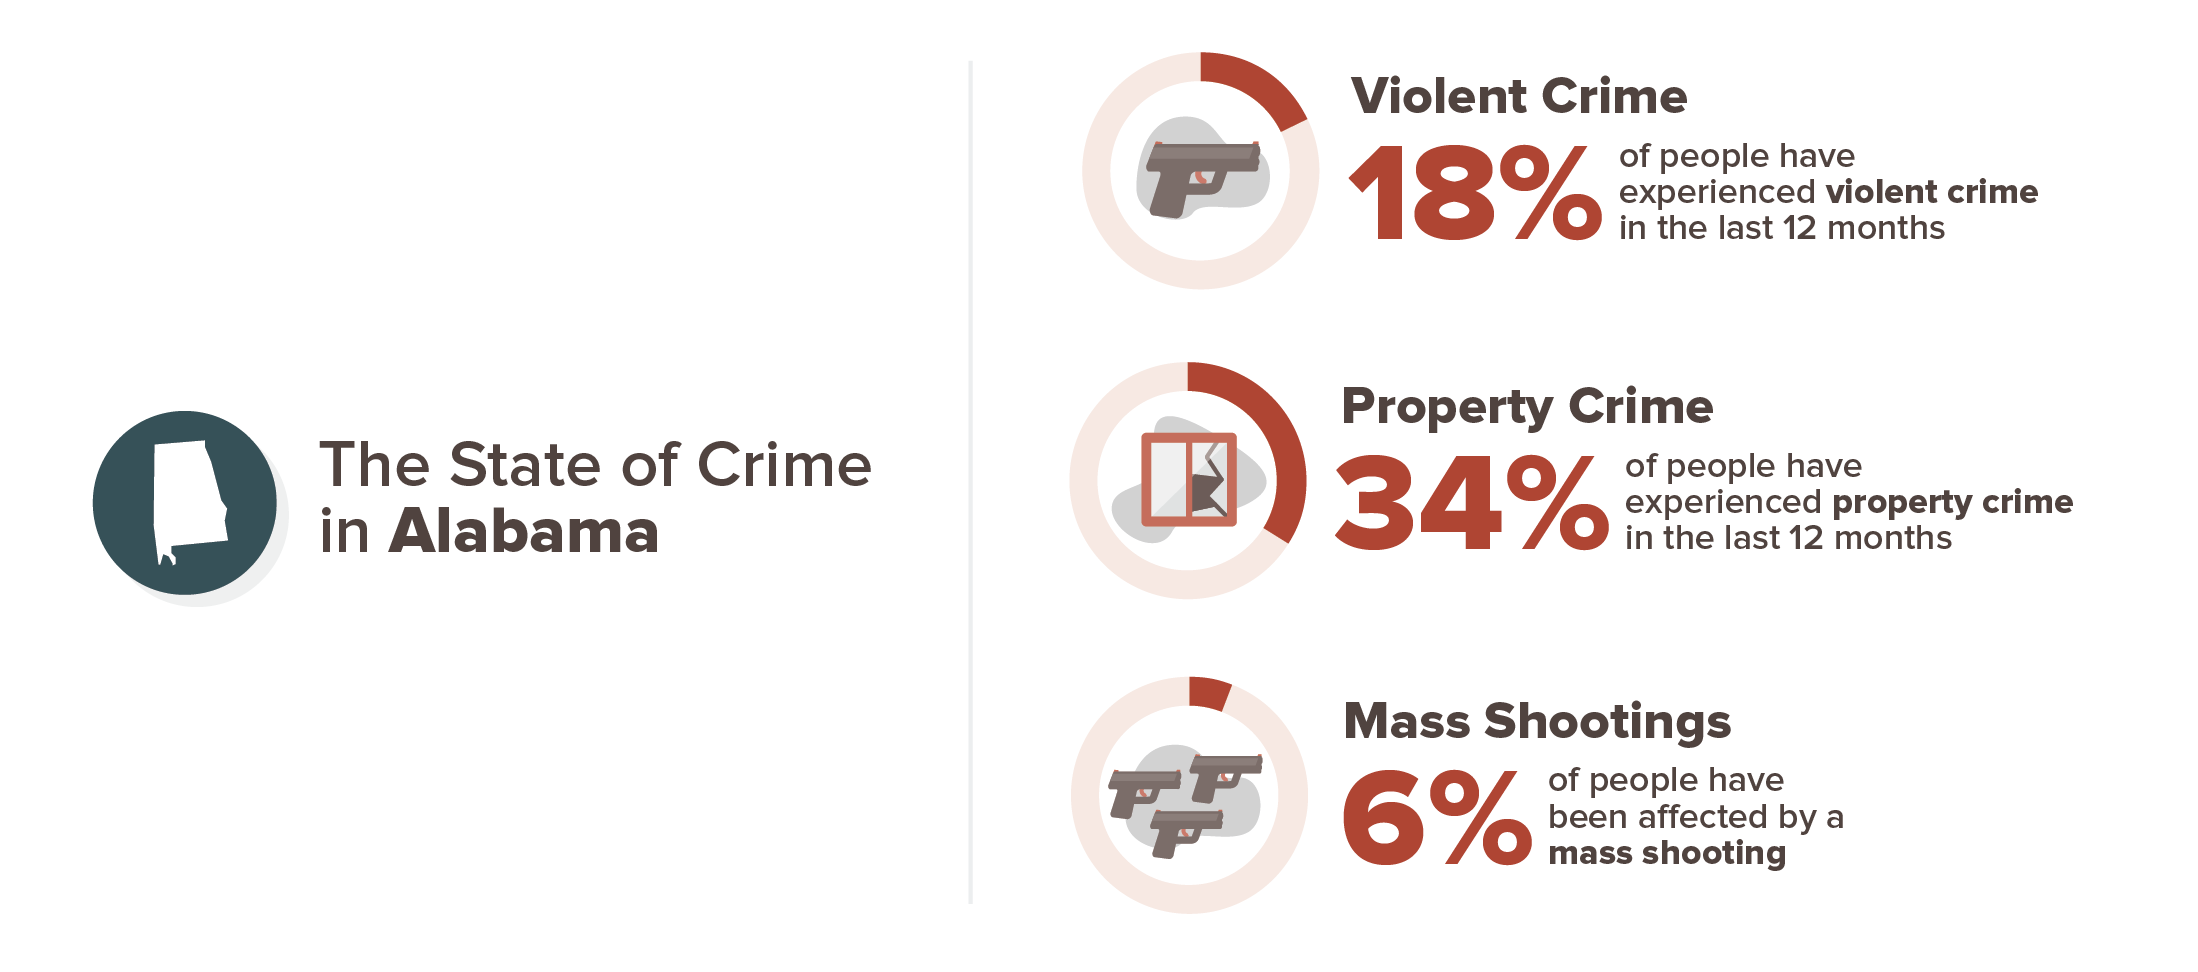 Alabama experience with crime infographic; 18% violent crime, 34% property crime, 6% mass shooting